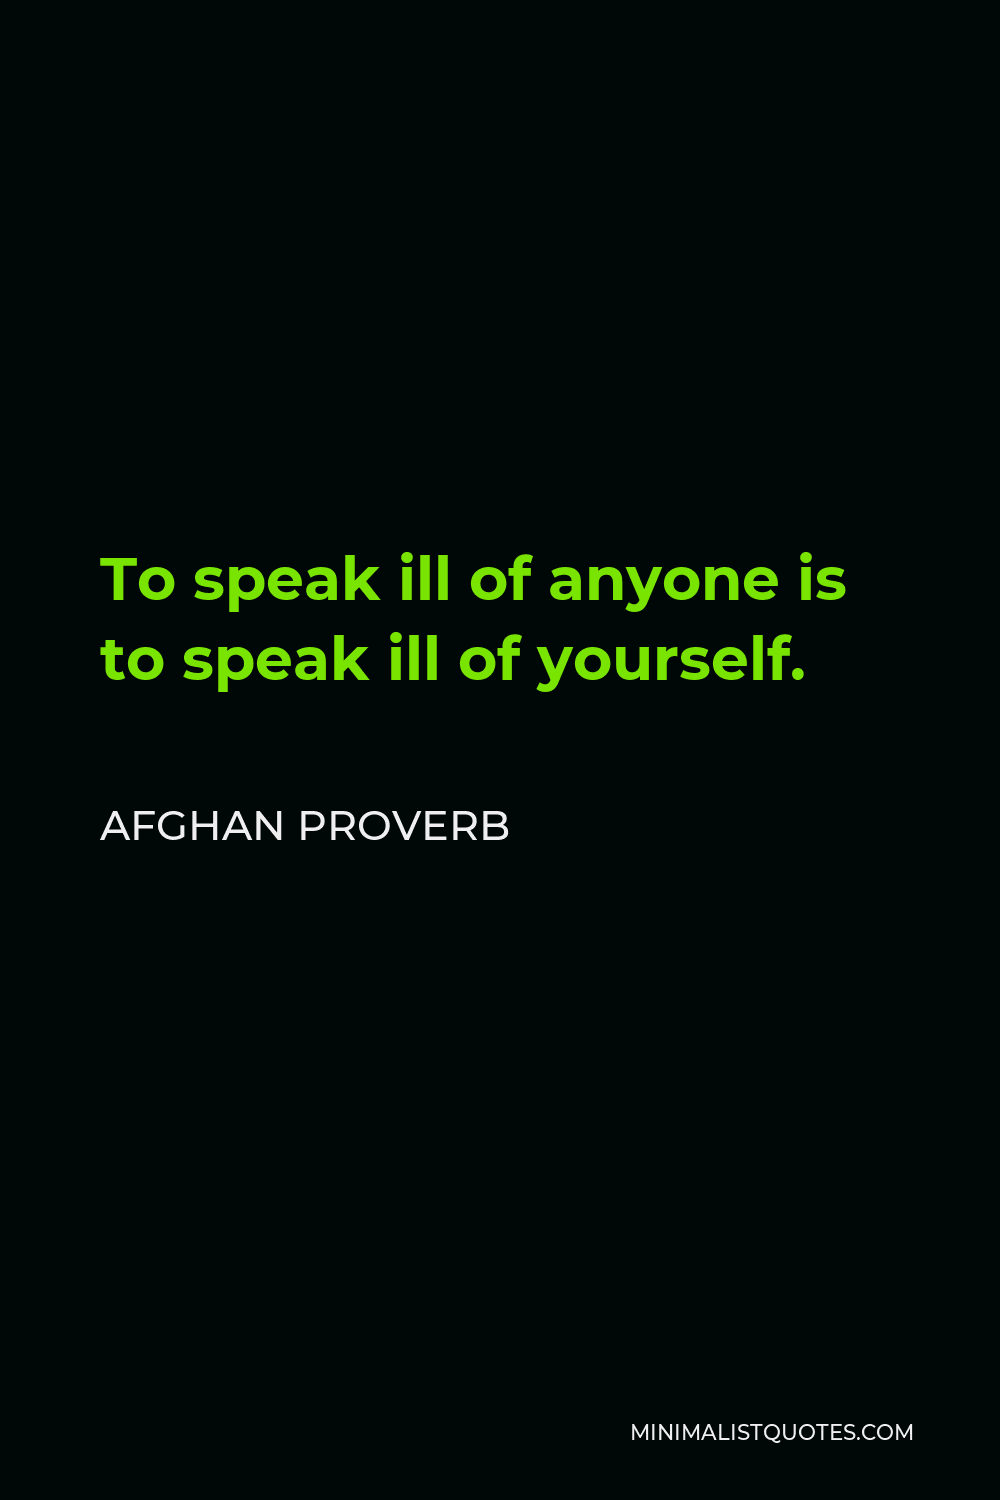 Afghan Proverb Quote - To speak ill of anyone is to speak ill of yourself.